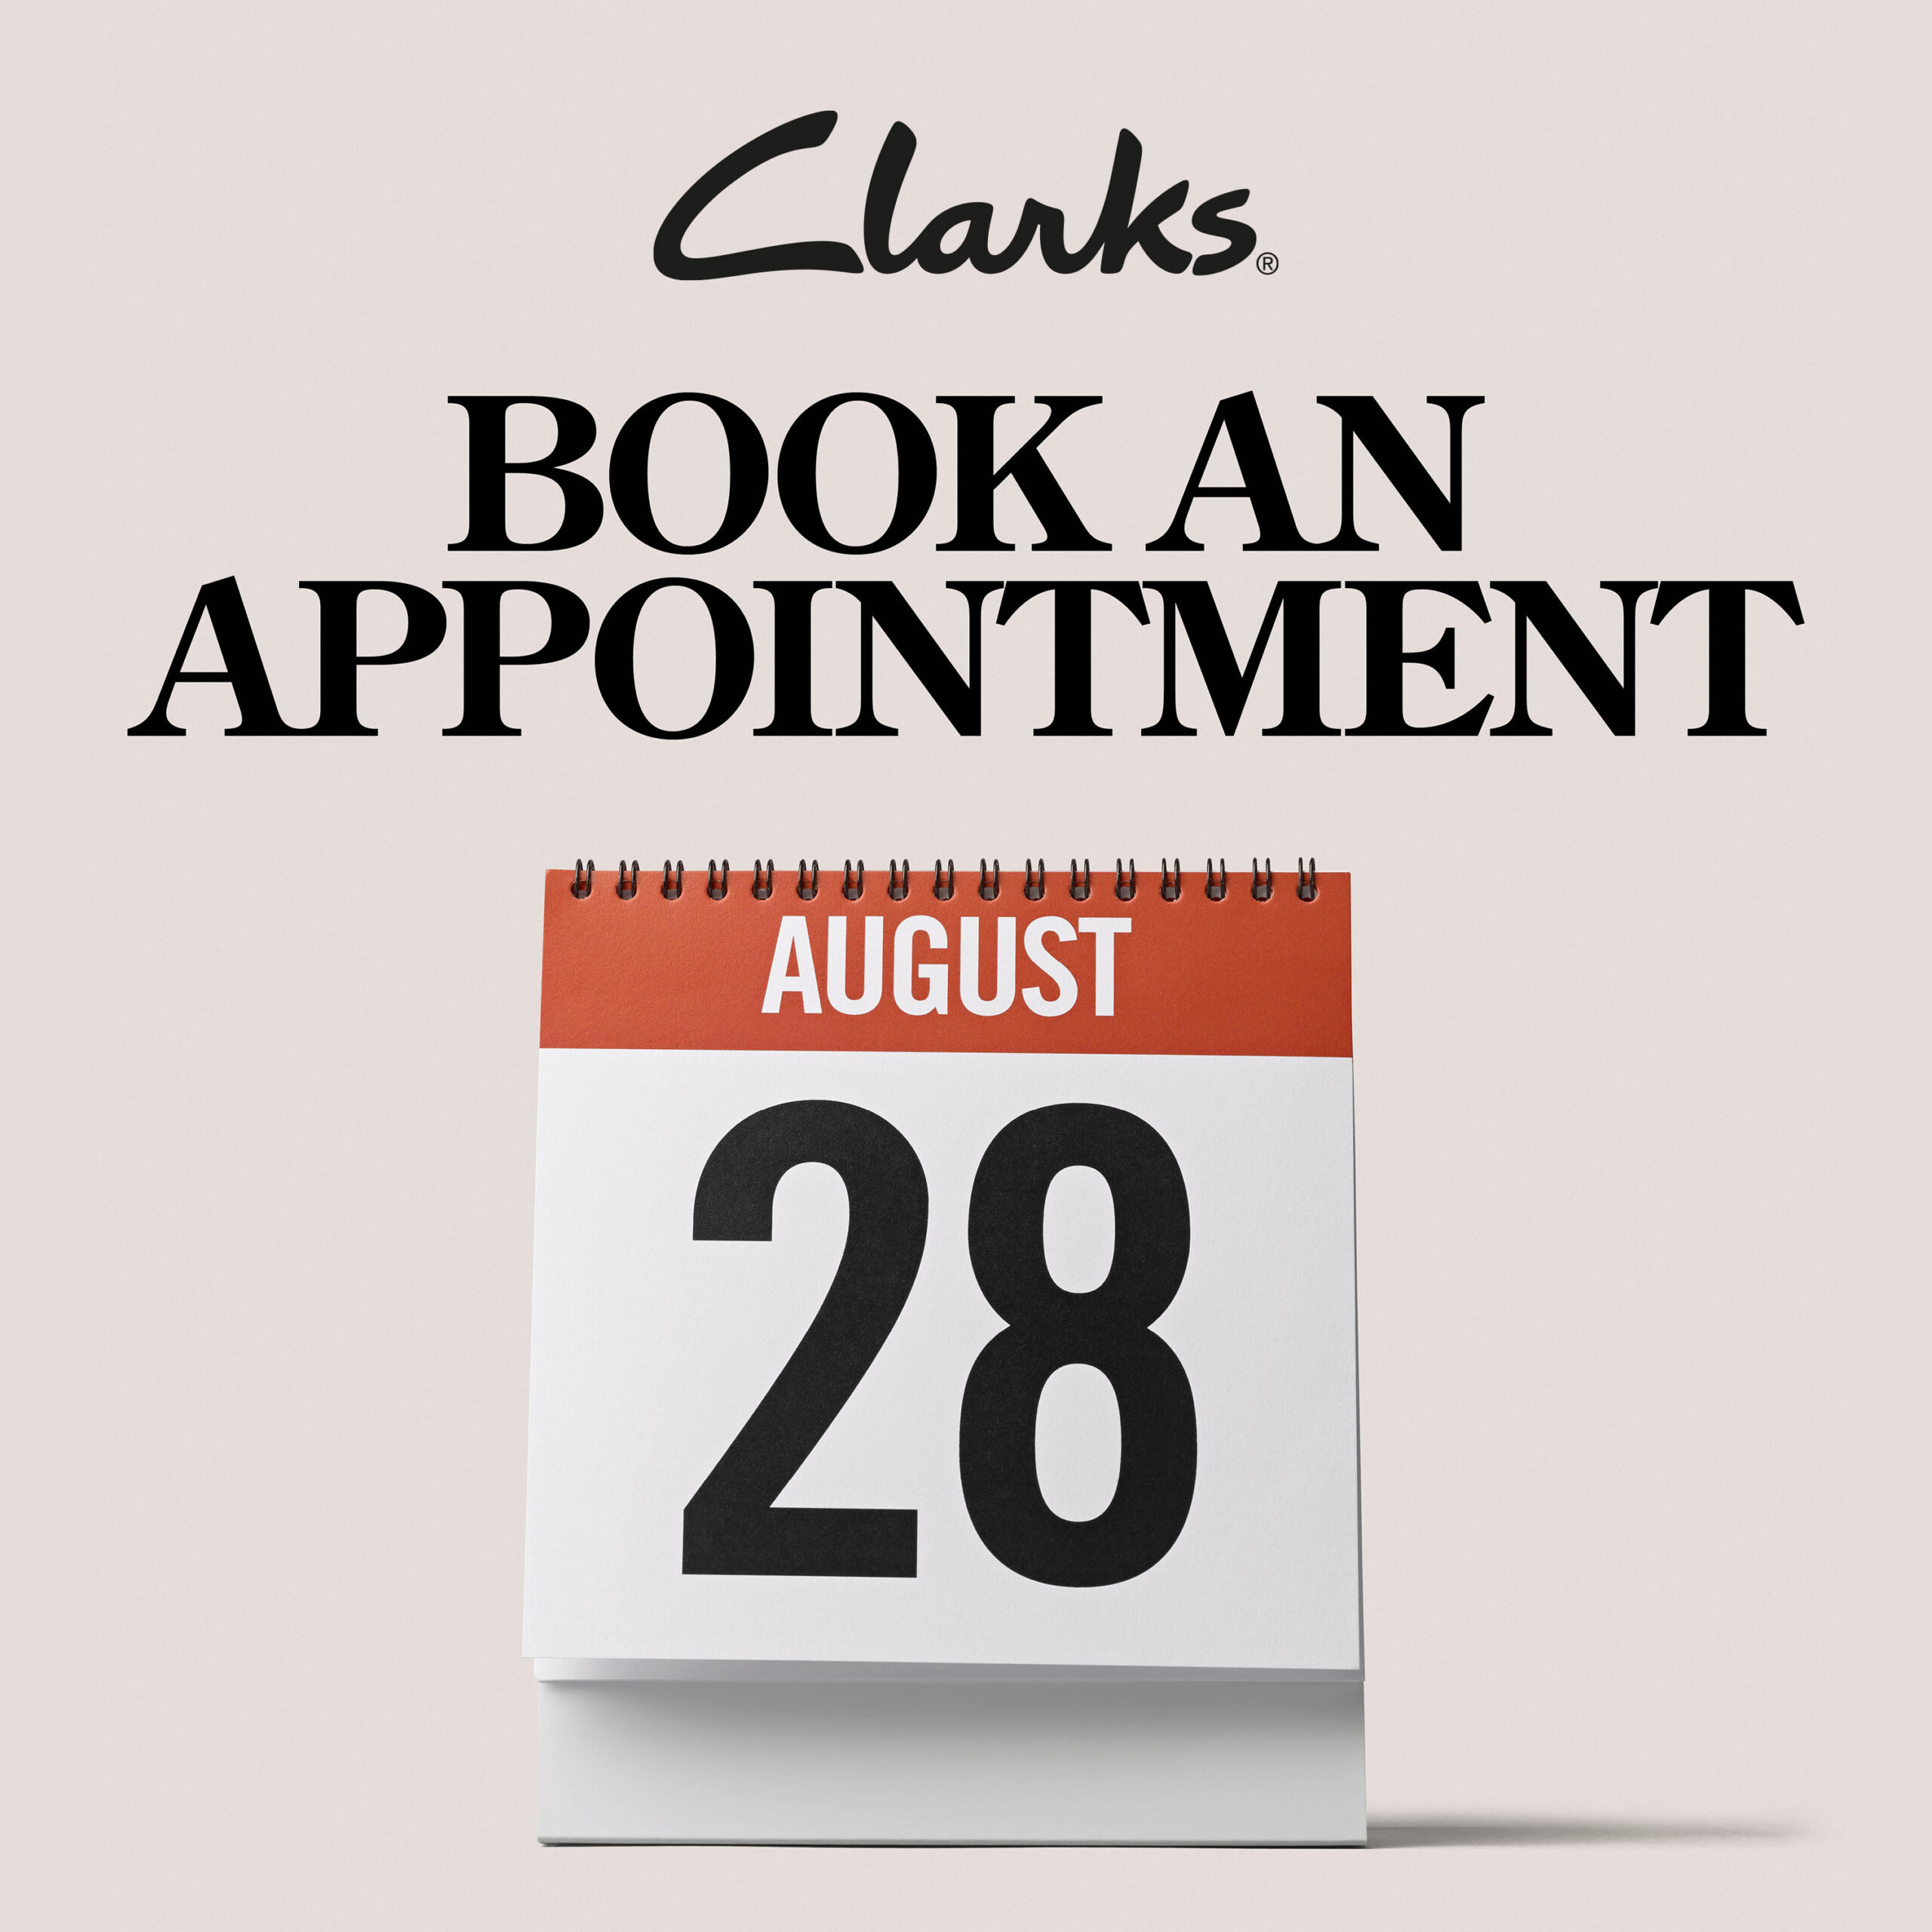 Back to School Shoes Appointments at Clarks